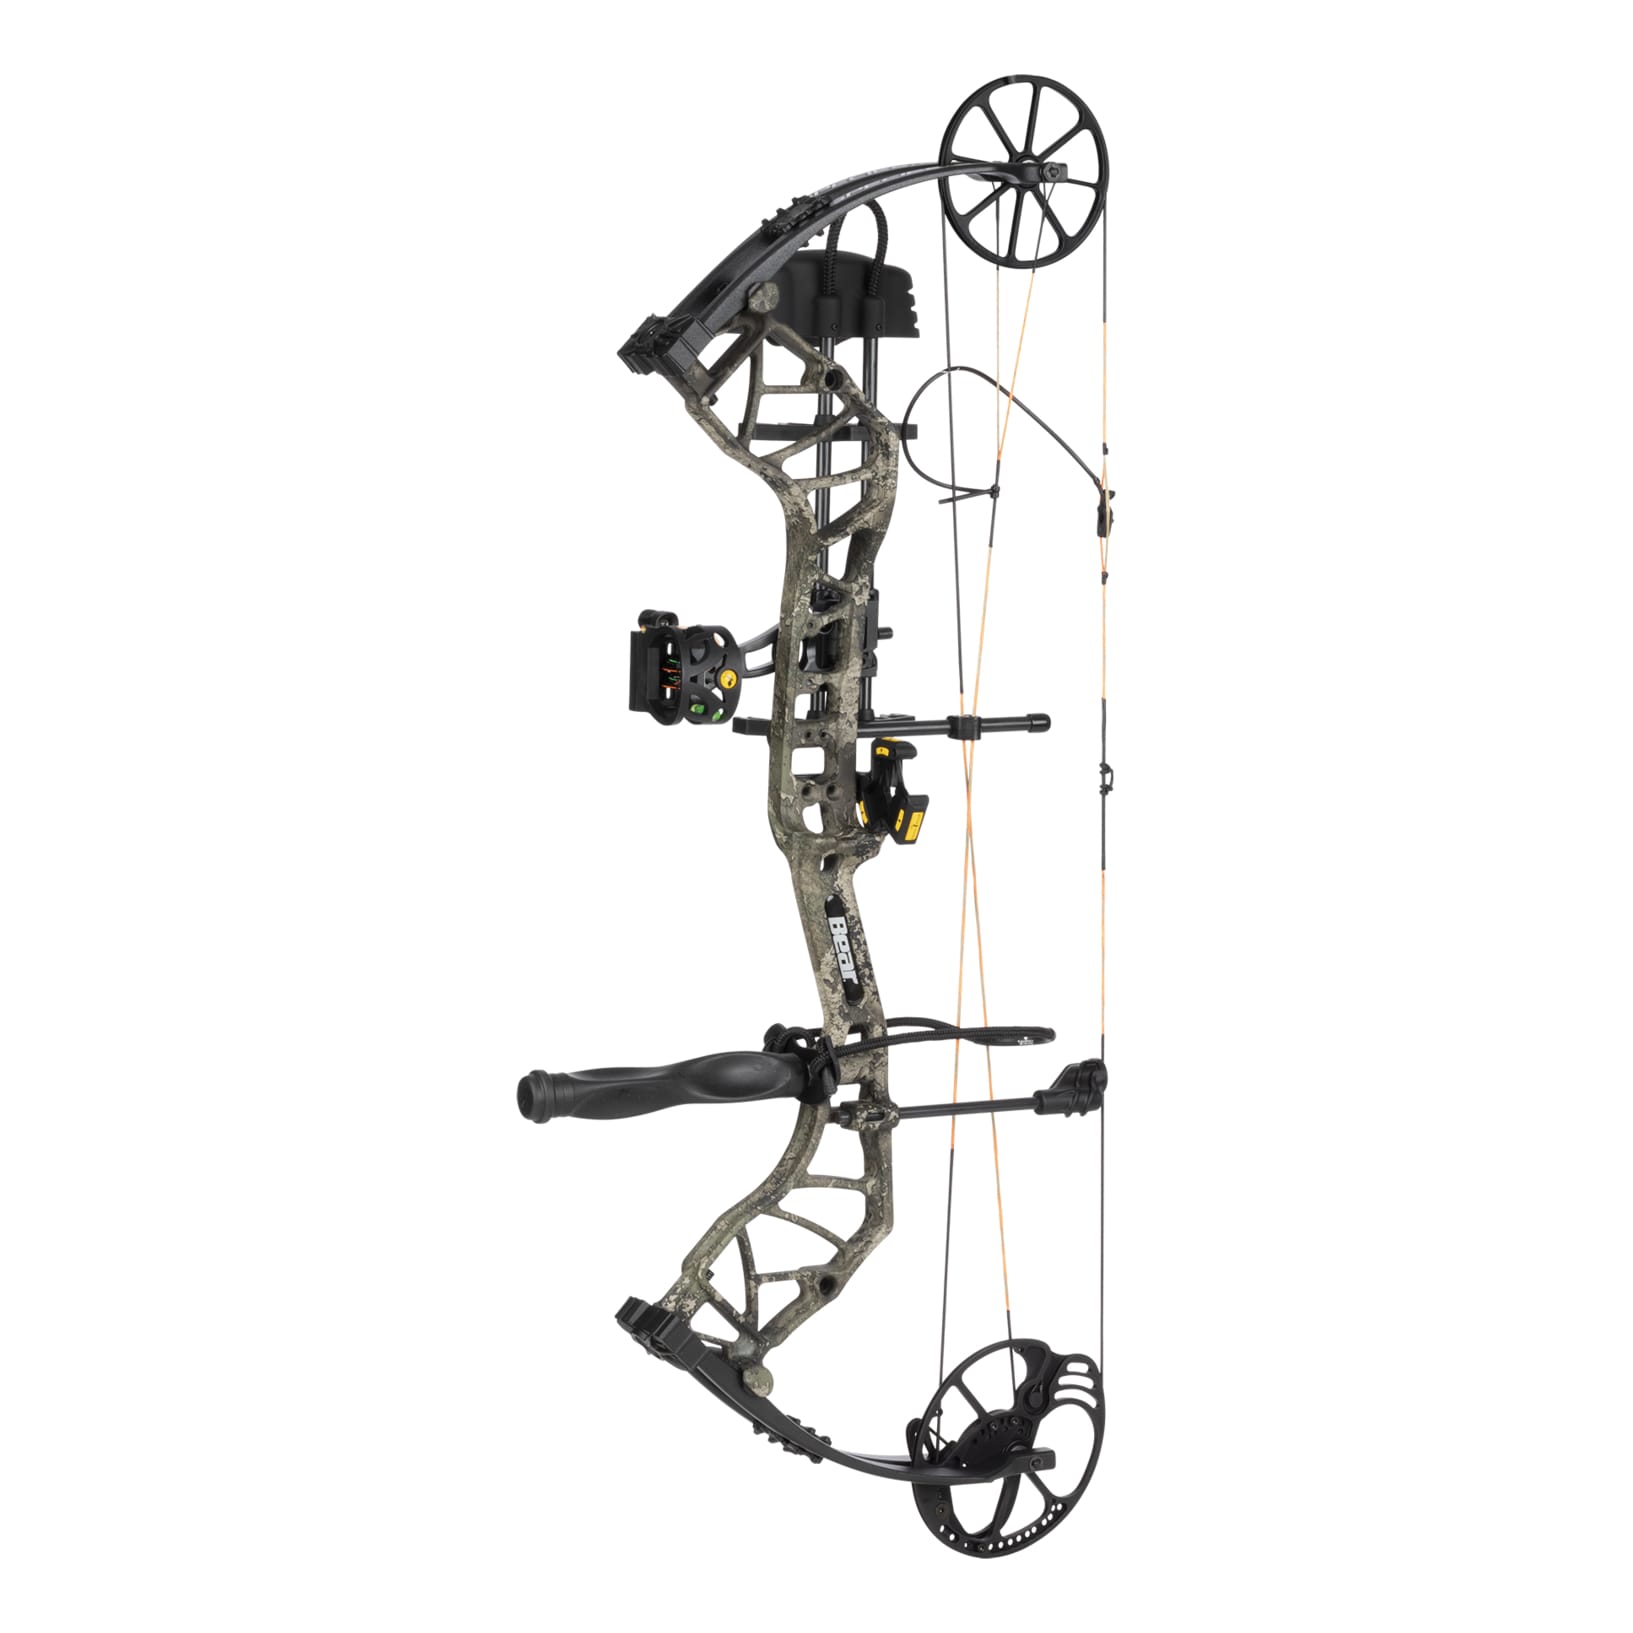 PSE Wave Bowfishing Bow Package, 40-Pound, Left Hand, Compound Bows -   Canada